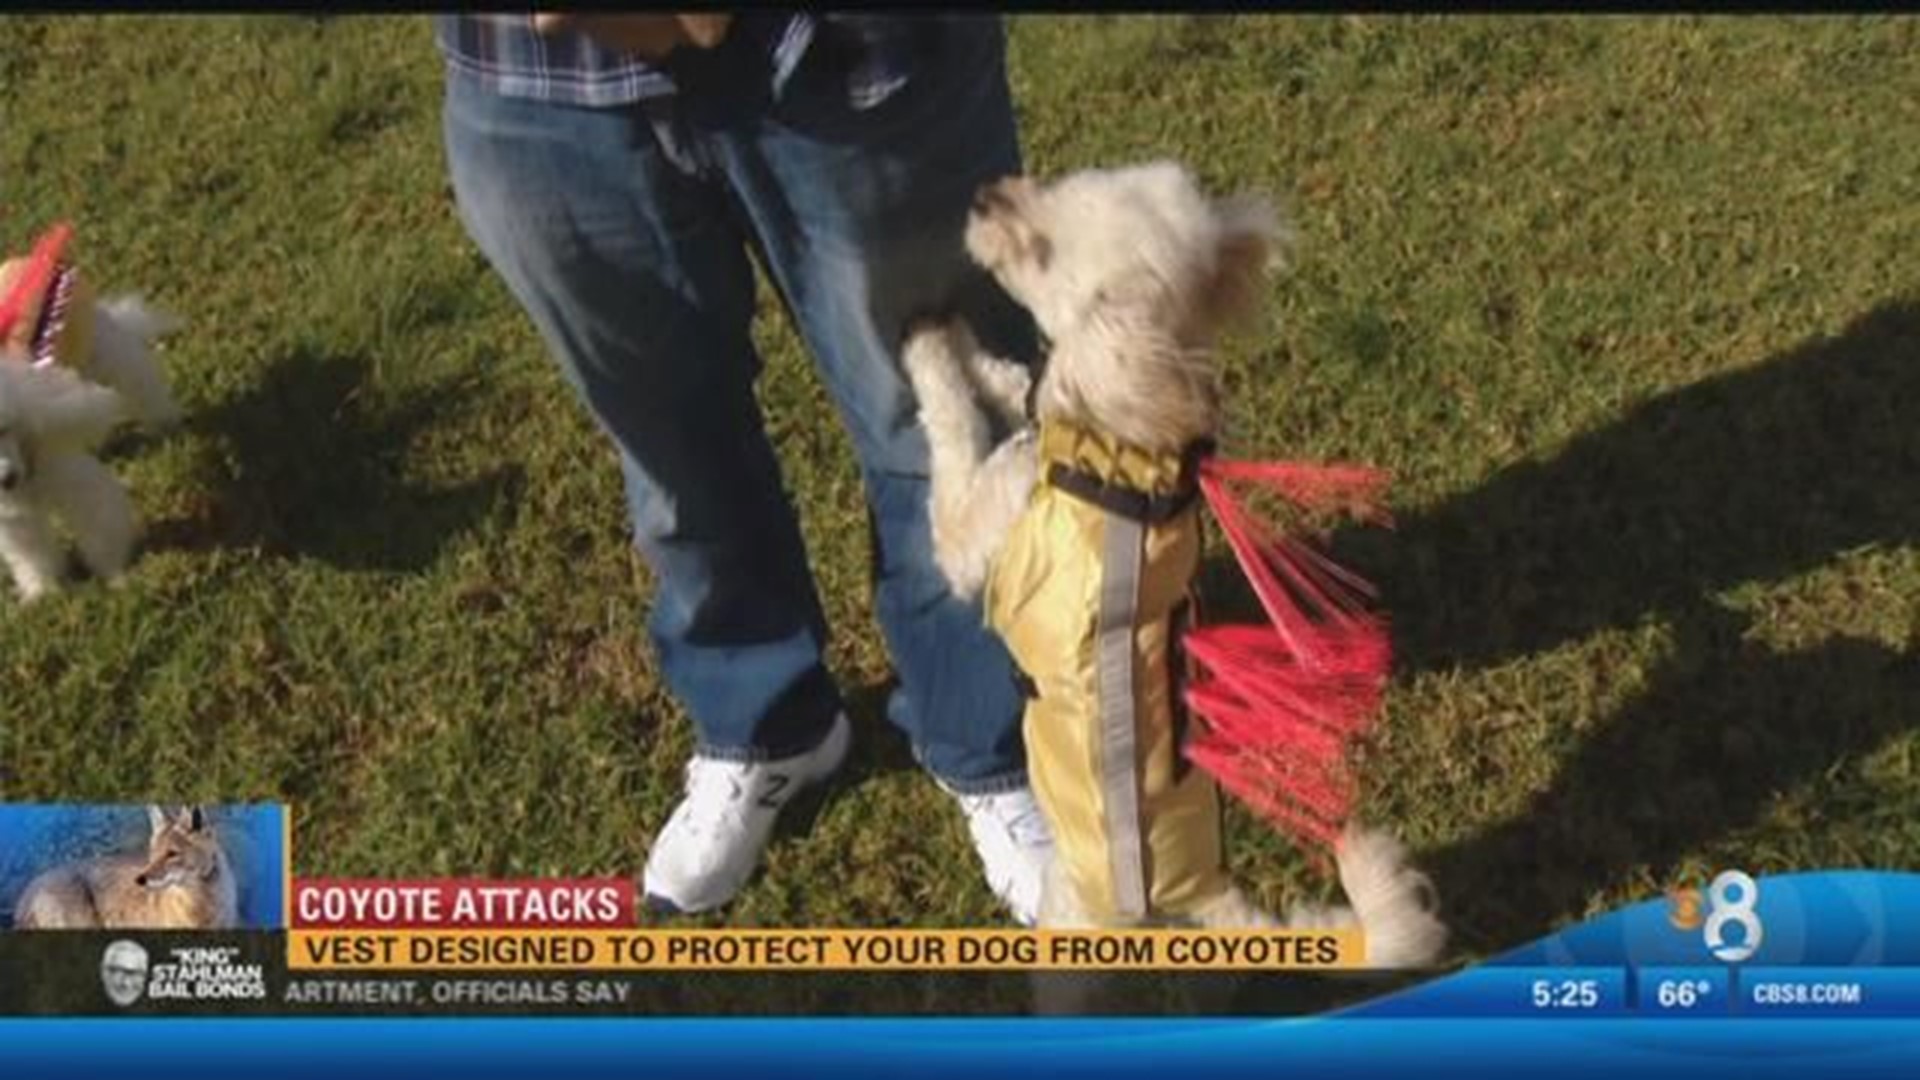 coyote vest for dogs - do they really work ? Watch amazing video